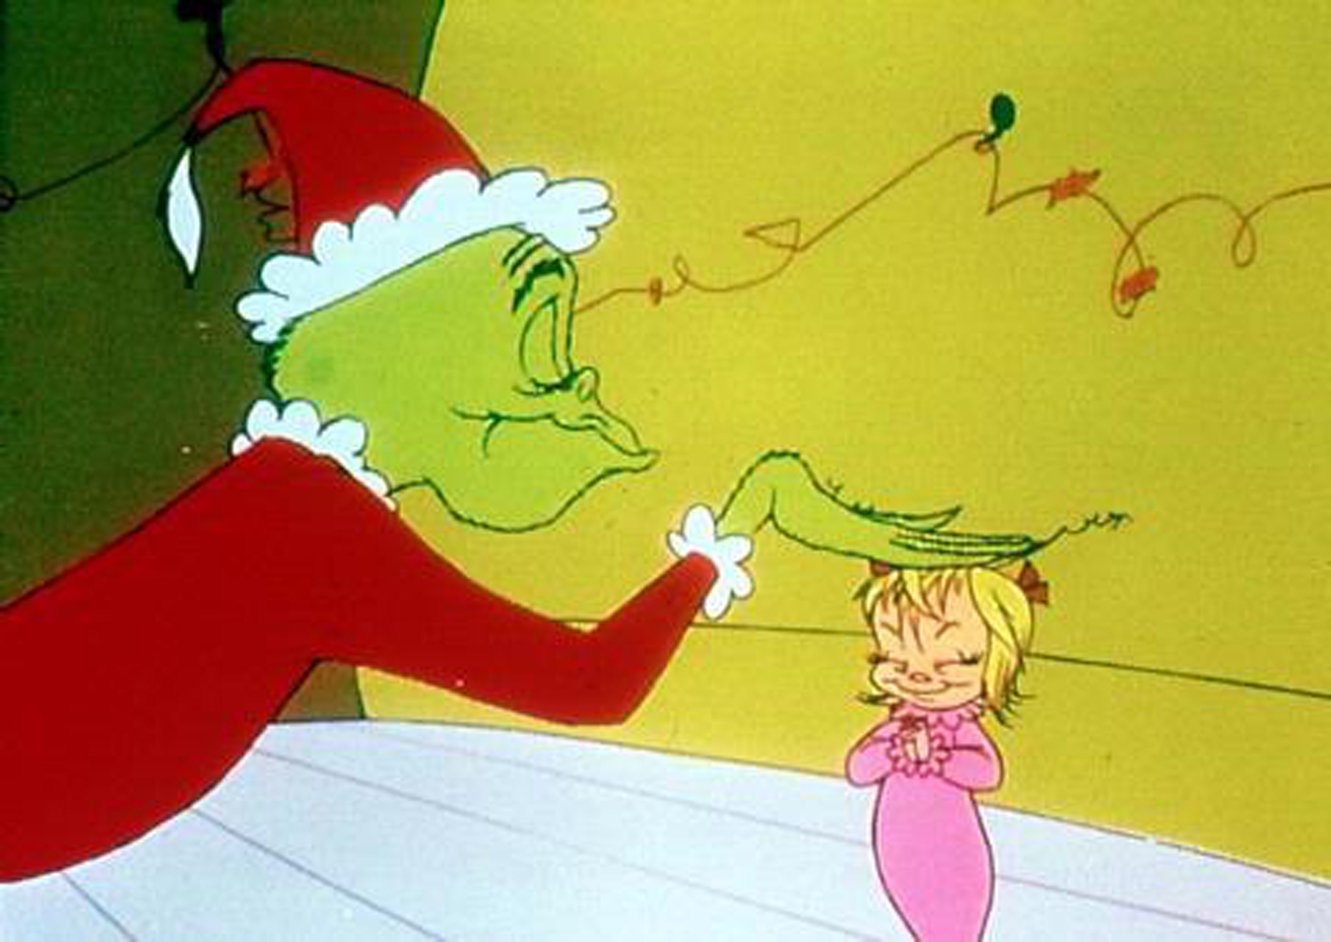 When and where you can watch 'How the Grinch Stole Christmas